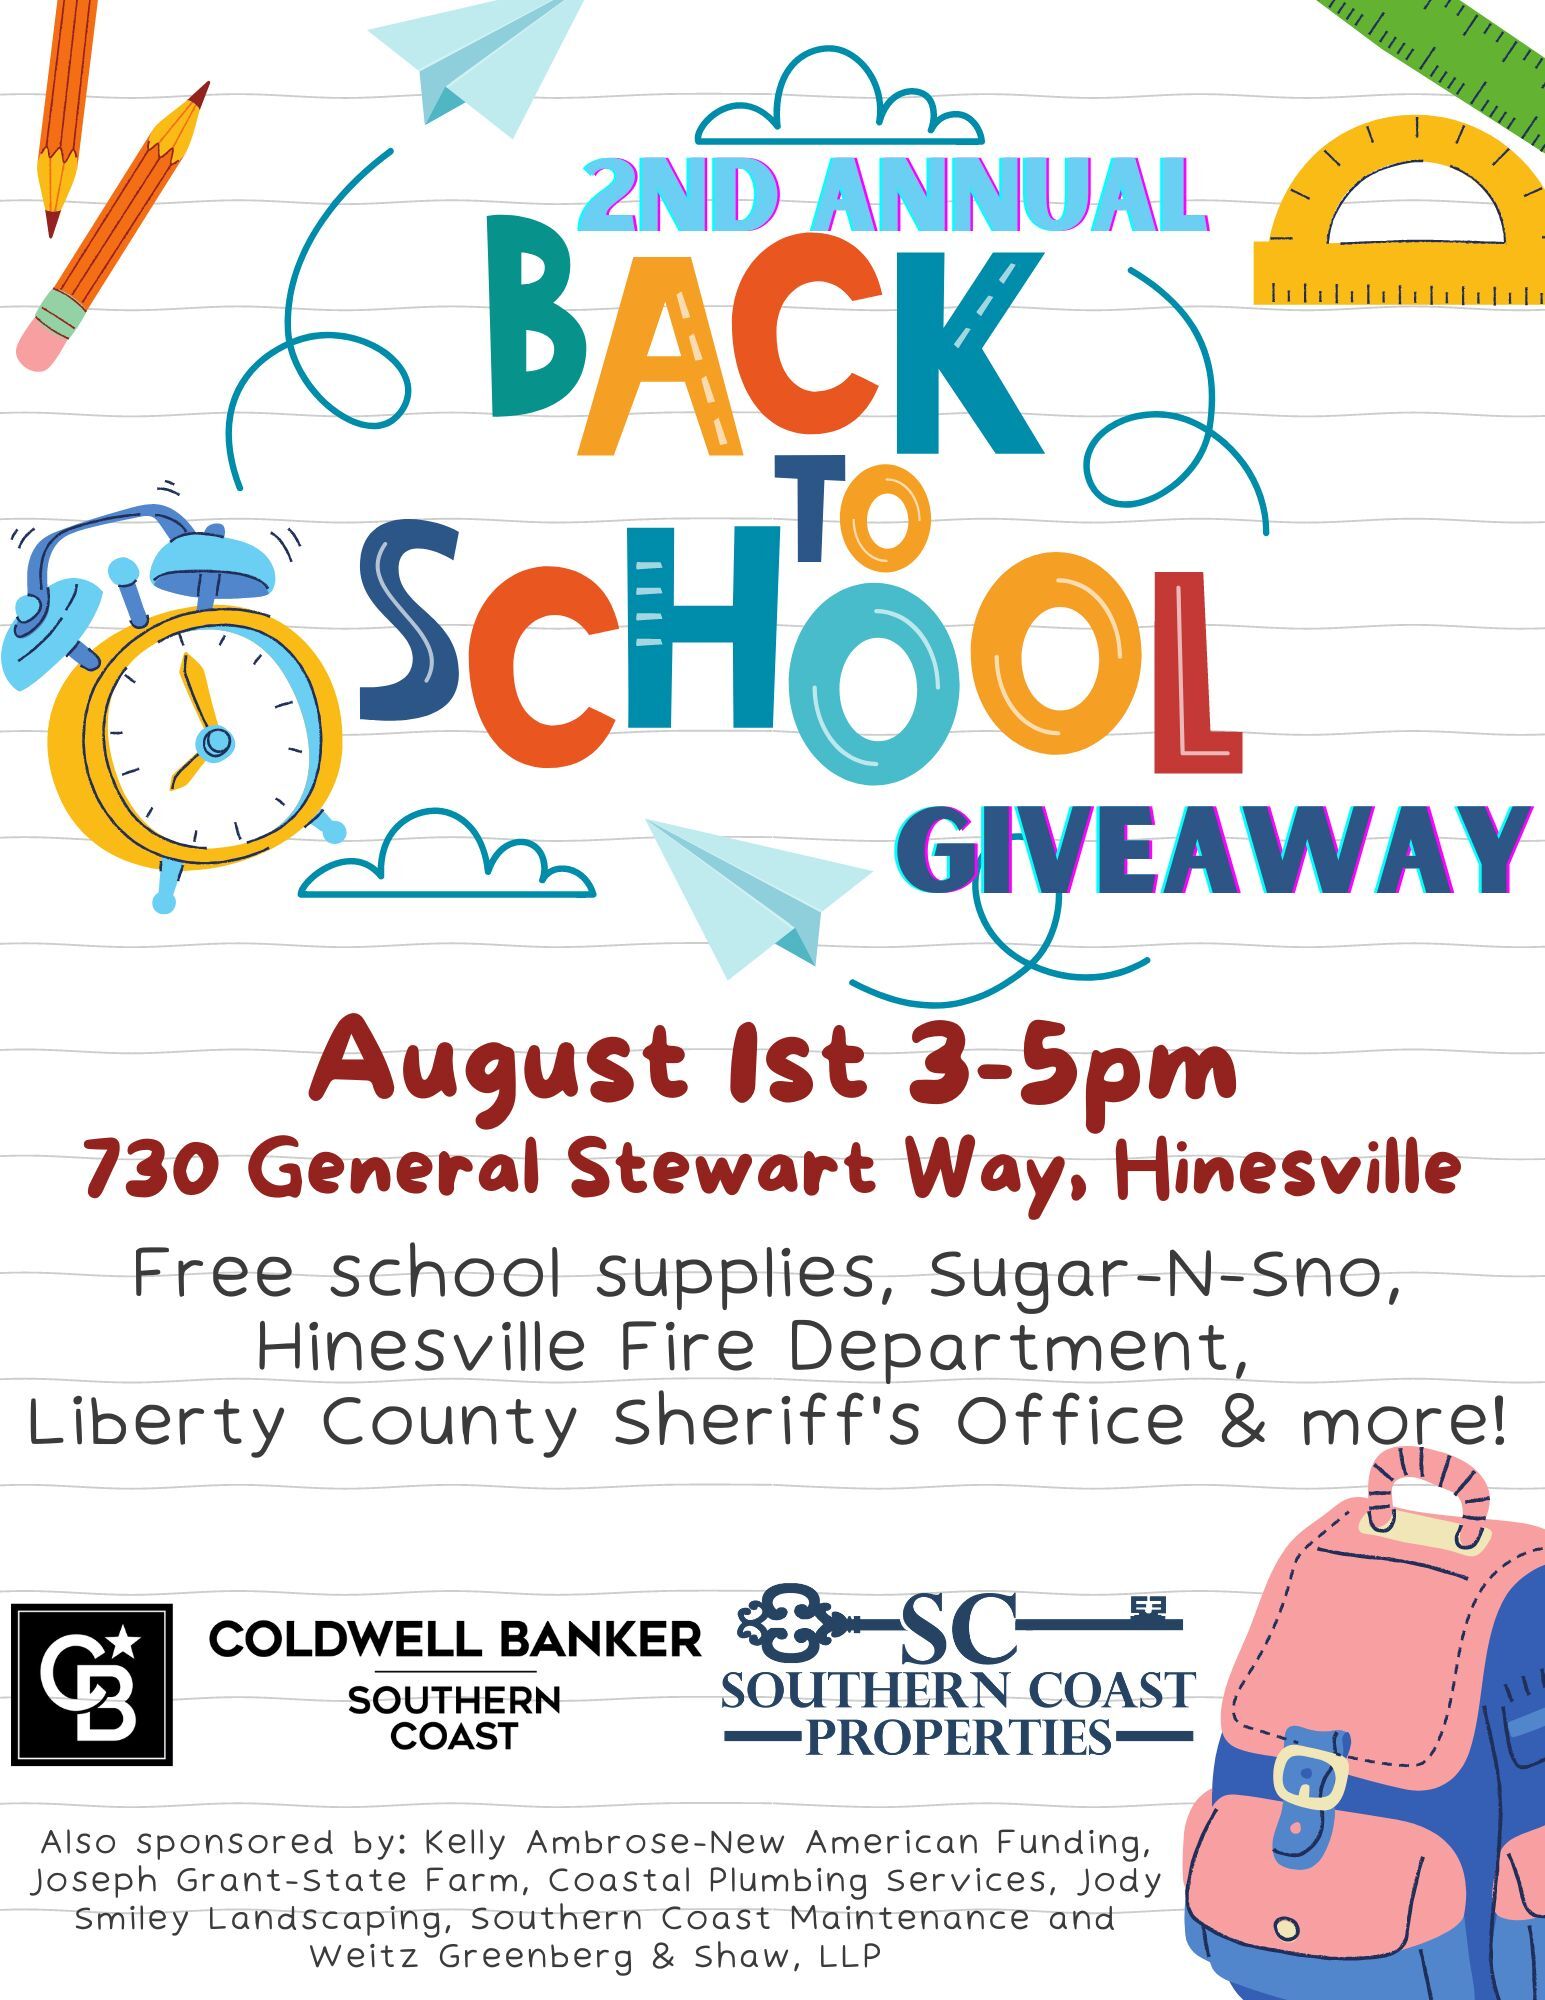 Back to school giveaway flyer